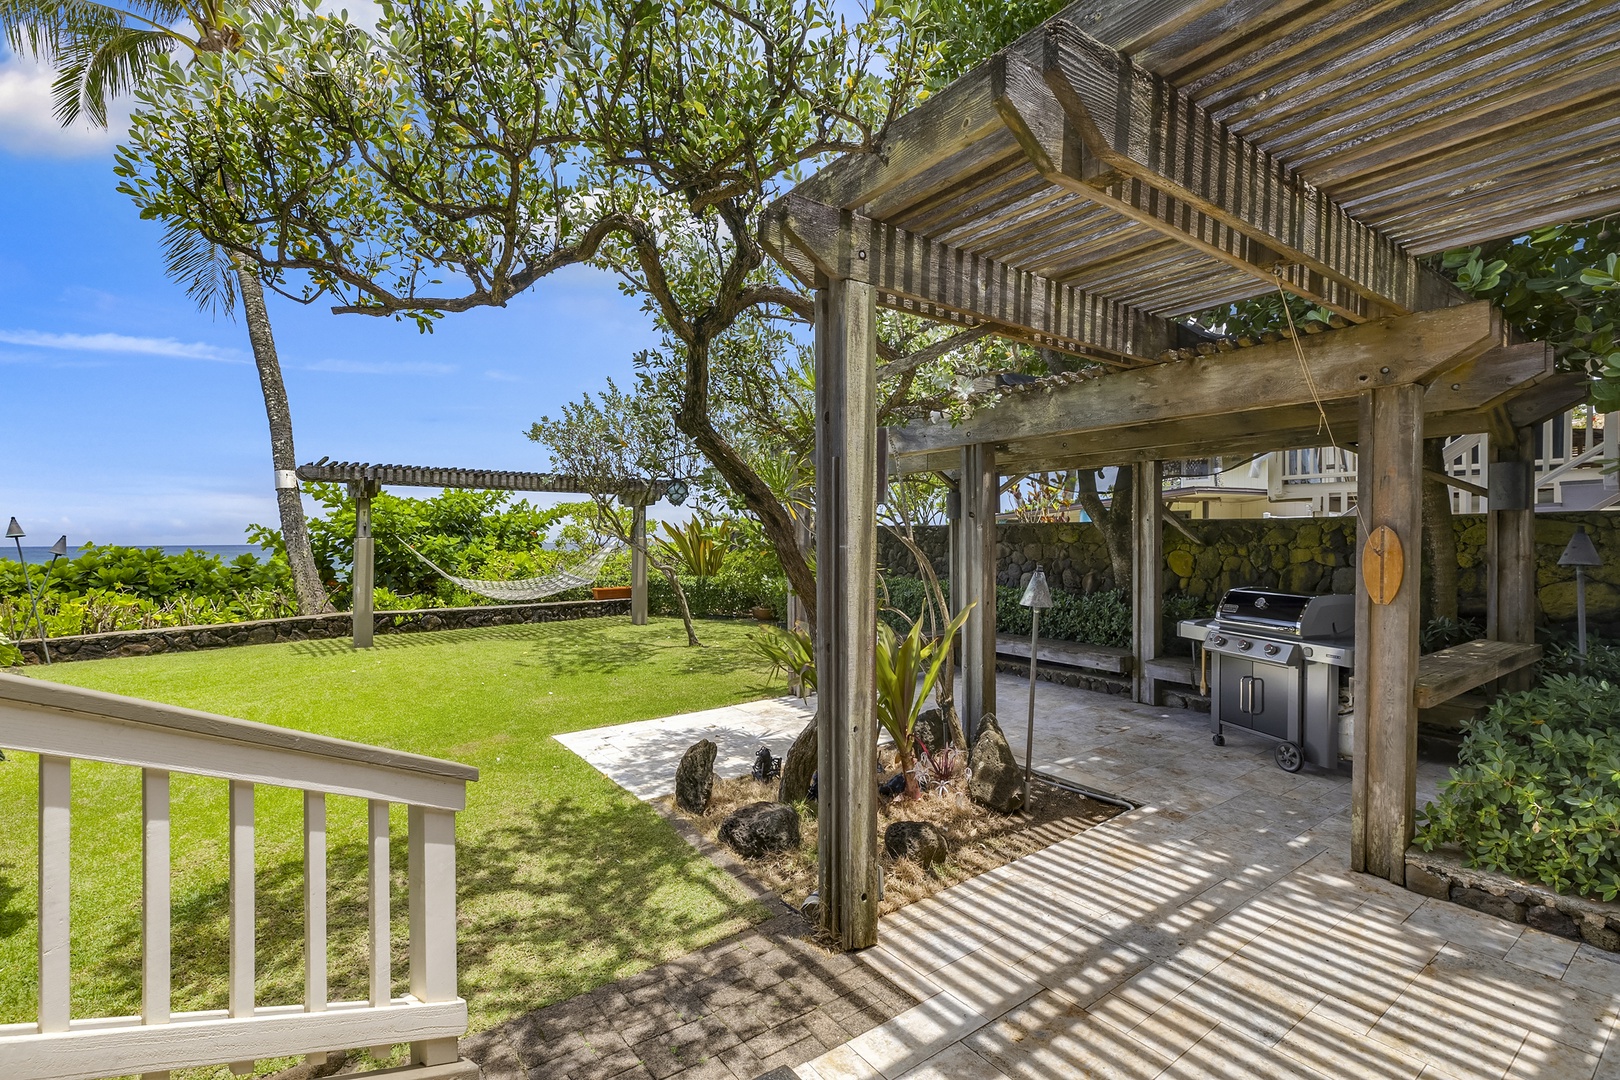 Haleiwa Vacation Rentals, Hale Kimo - The covered BBQ area has an amazing view.